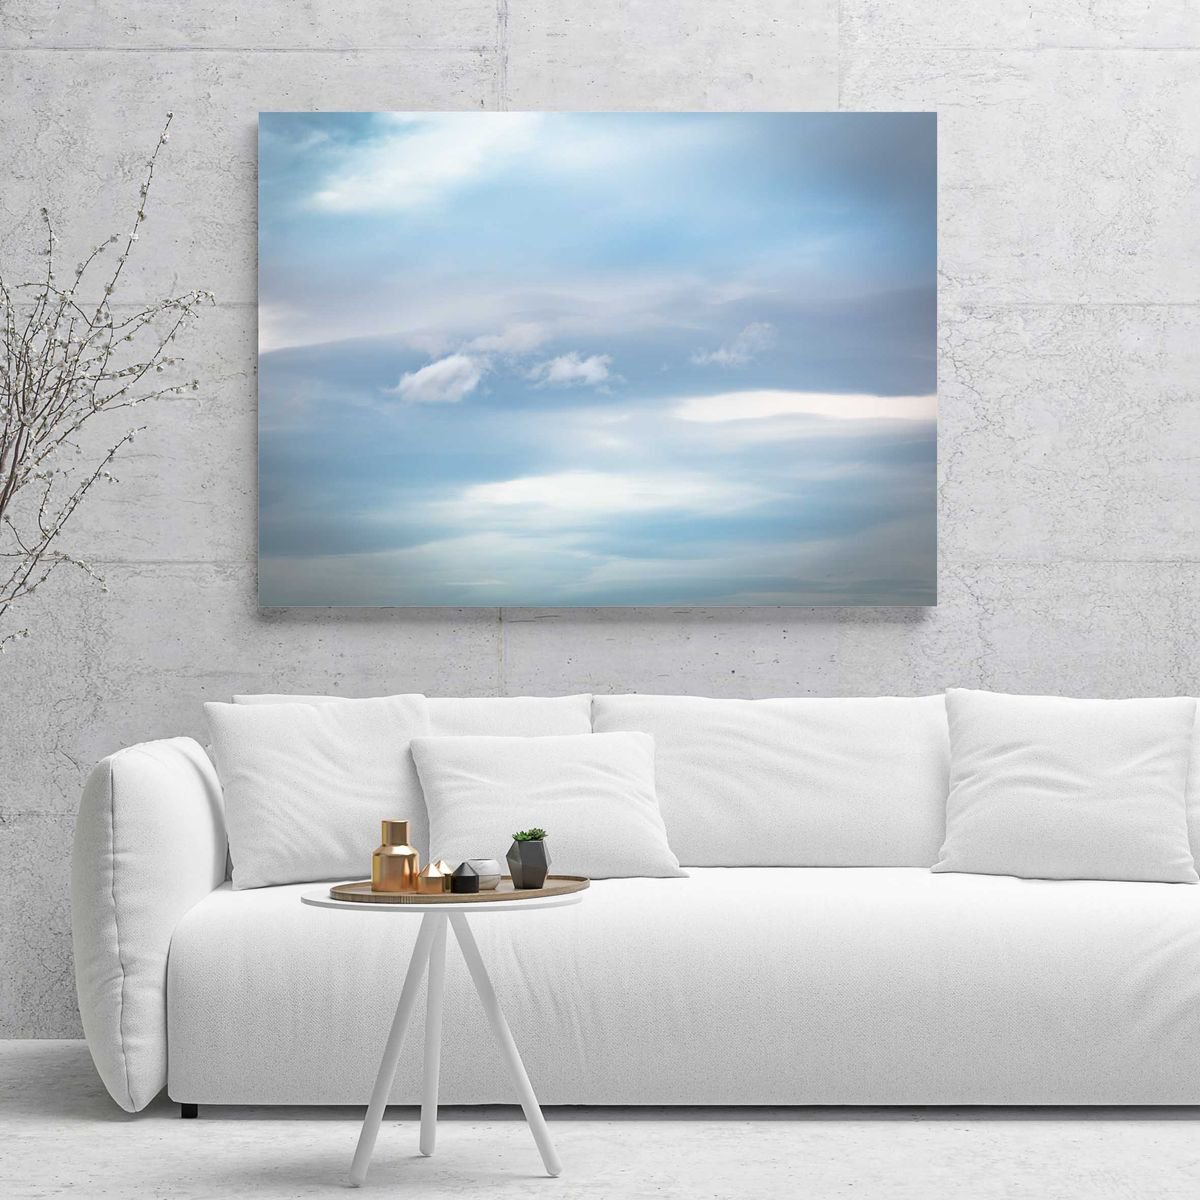 Any Other Day - abstract cloud canvas in blue and white by Lynne Douglas